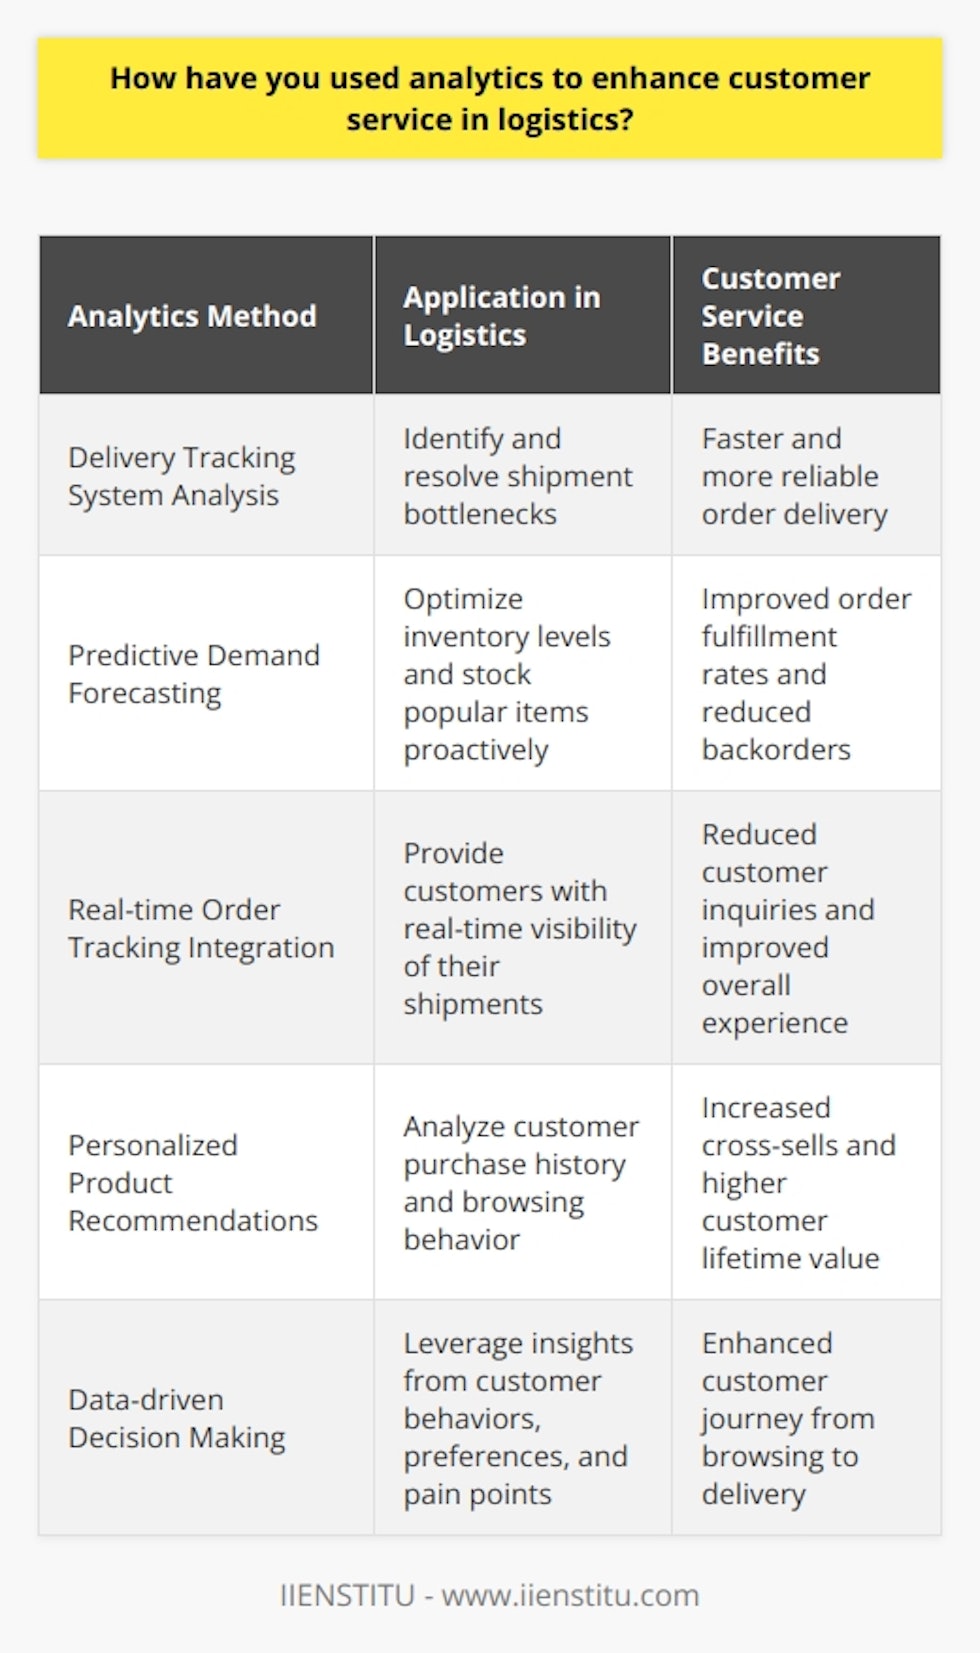 In my previous role as a logistics analyst, I utilized analytics to enhance customer service in several ways: Identifying Delivery Bottlenecks I analyzed data from our delivery tracking system to identify areas where shipments were consistently delayed. By pinpointing these bottlenecks, we were able to make targeted improvements to streamline our delivery process and reduce transit times. This resulted in happier customers who received their orders faster and more reliably. Predictive Demand Forecasting Using historical sales data and machine learning algorithms, I developed predictive models to forecast customer demand. These insights helped us optimize inventory levels and proactively stock items that were likely to be popular. By having the right products available when customers wanted them, we improved order fulfillment rates and reduced backorders, leading to greater customer satisfaction. Real-time Order Tracking I worked on integrating our order management system with a real-time tracking platform. This allowed customers to see exactly where their shipment was at any given moment, from the warehouse to their doorstep. Providing this level of transparency and visibility greatly reduced customer inquiries and improved their overall experience with our brand. Personalized Product Recommendations By analyzing individual customer purchase histories and browsing behavior, I helped develop personalized product recommendation engines. These tailored suggestions made it easier for customers to discover items they were likely to love, increasing cross-sells and driving higher customer lifetime value. Customers appreciated the curated shopping experience and felt that we truly understood their needs and preferences. Throughout these initiatives, my goal was always to leverage data and analytics to better serve our customers. By gaining deeper insights into their behaviors, preferences, and pain points, we were able to make smarter decisions that enhanced every touchpoint of the customer journey, from browsing to buying to delivery and beyond.